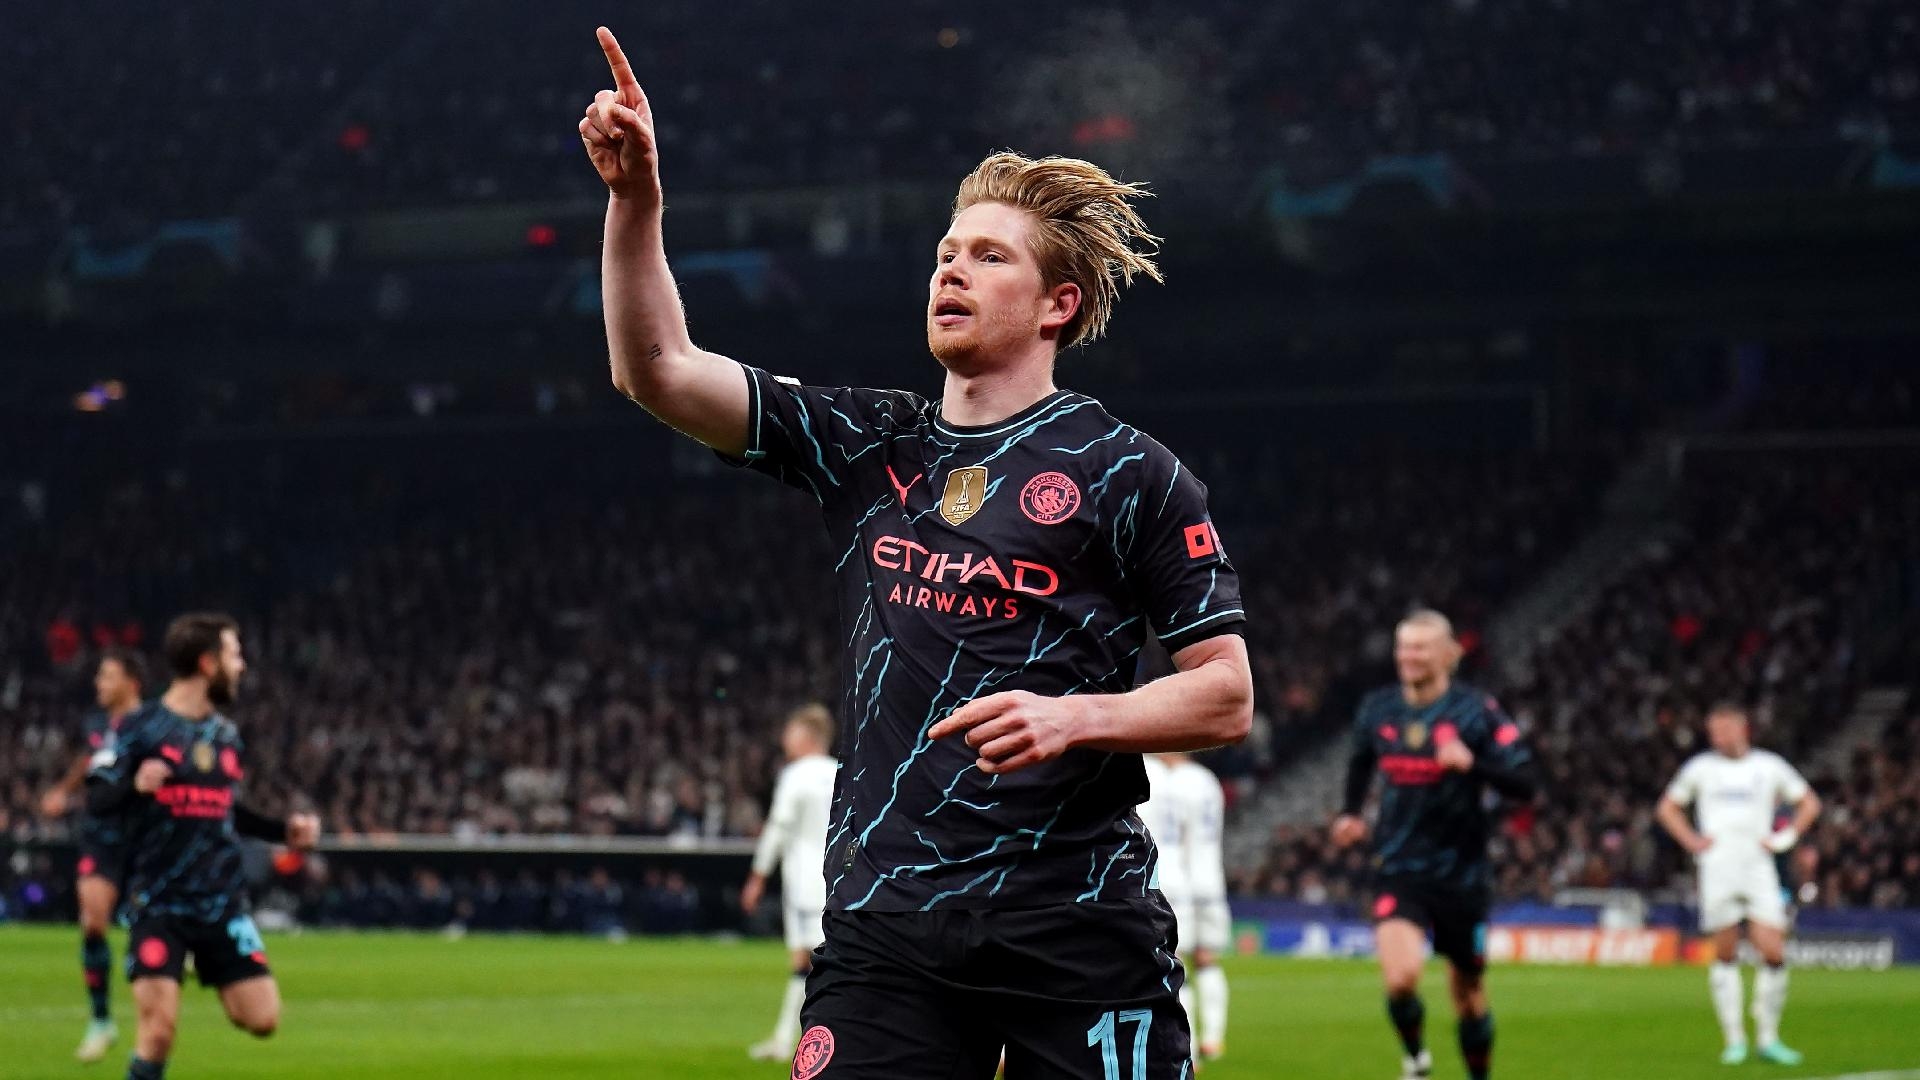 Champions League: Stunning strikes from Vinícius Jr. and Kevin De Bruyne  leave semifinal tie between Real Madrid and Manchester City finely balanced